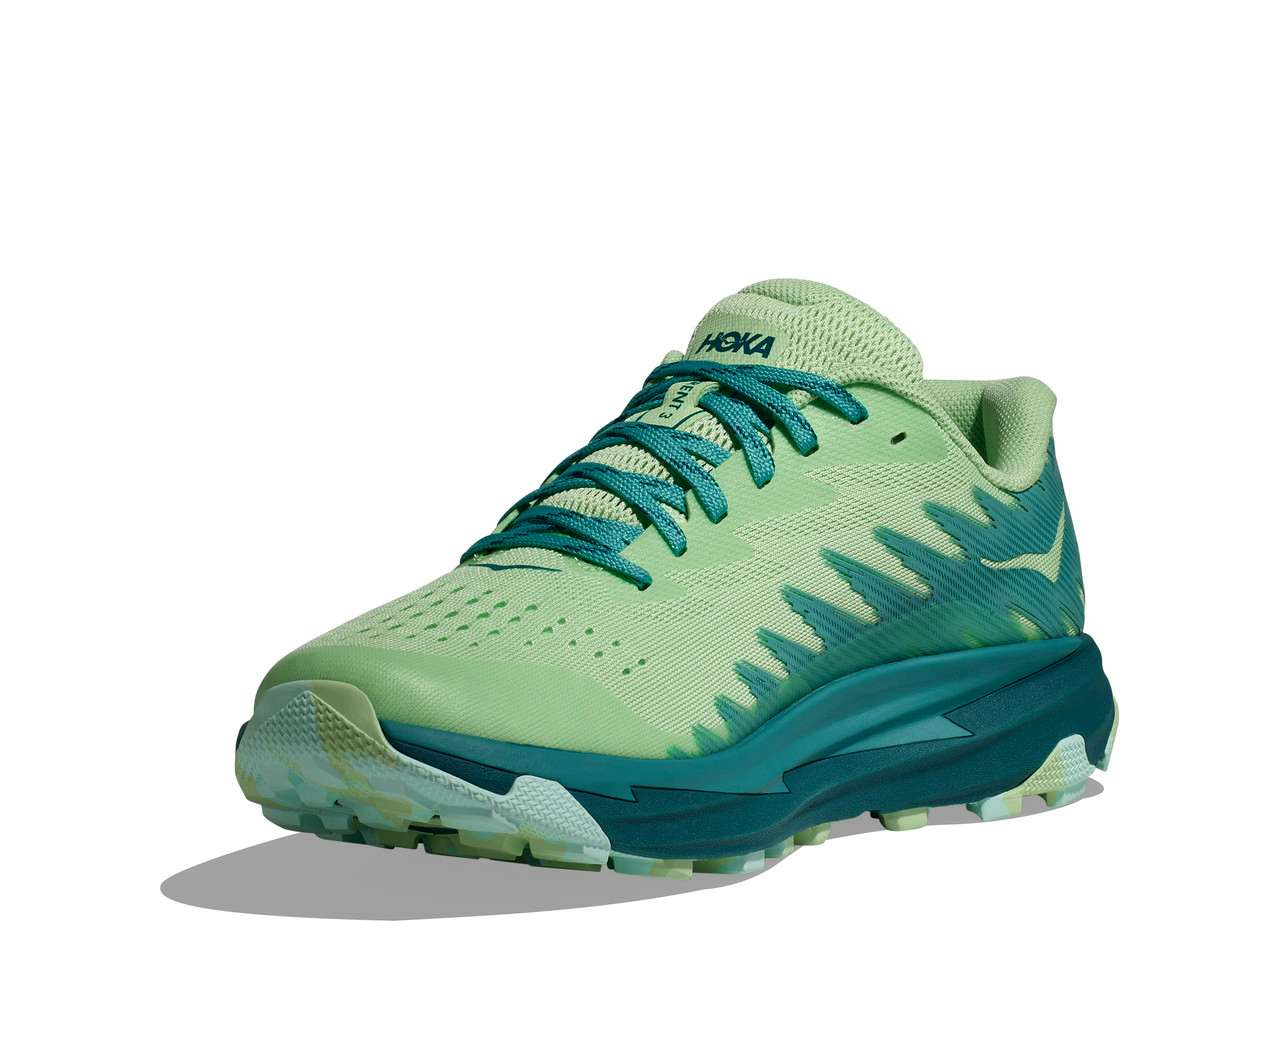 Torrent 3 Trail Running Shoes Lime Glow/Deep Lagoon